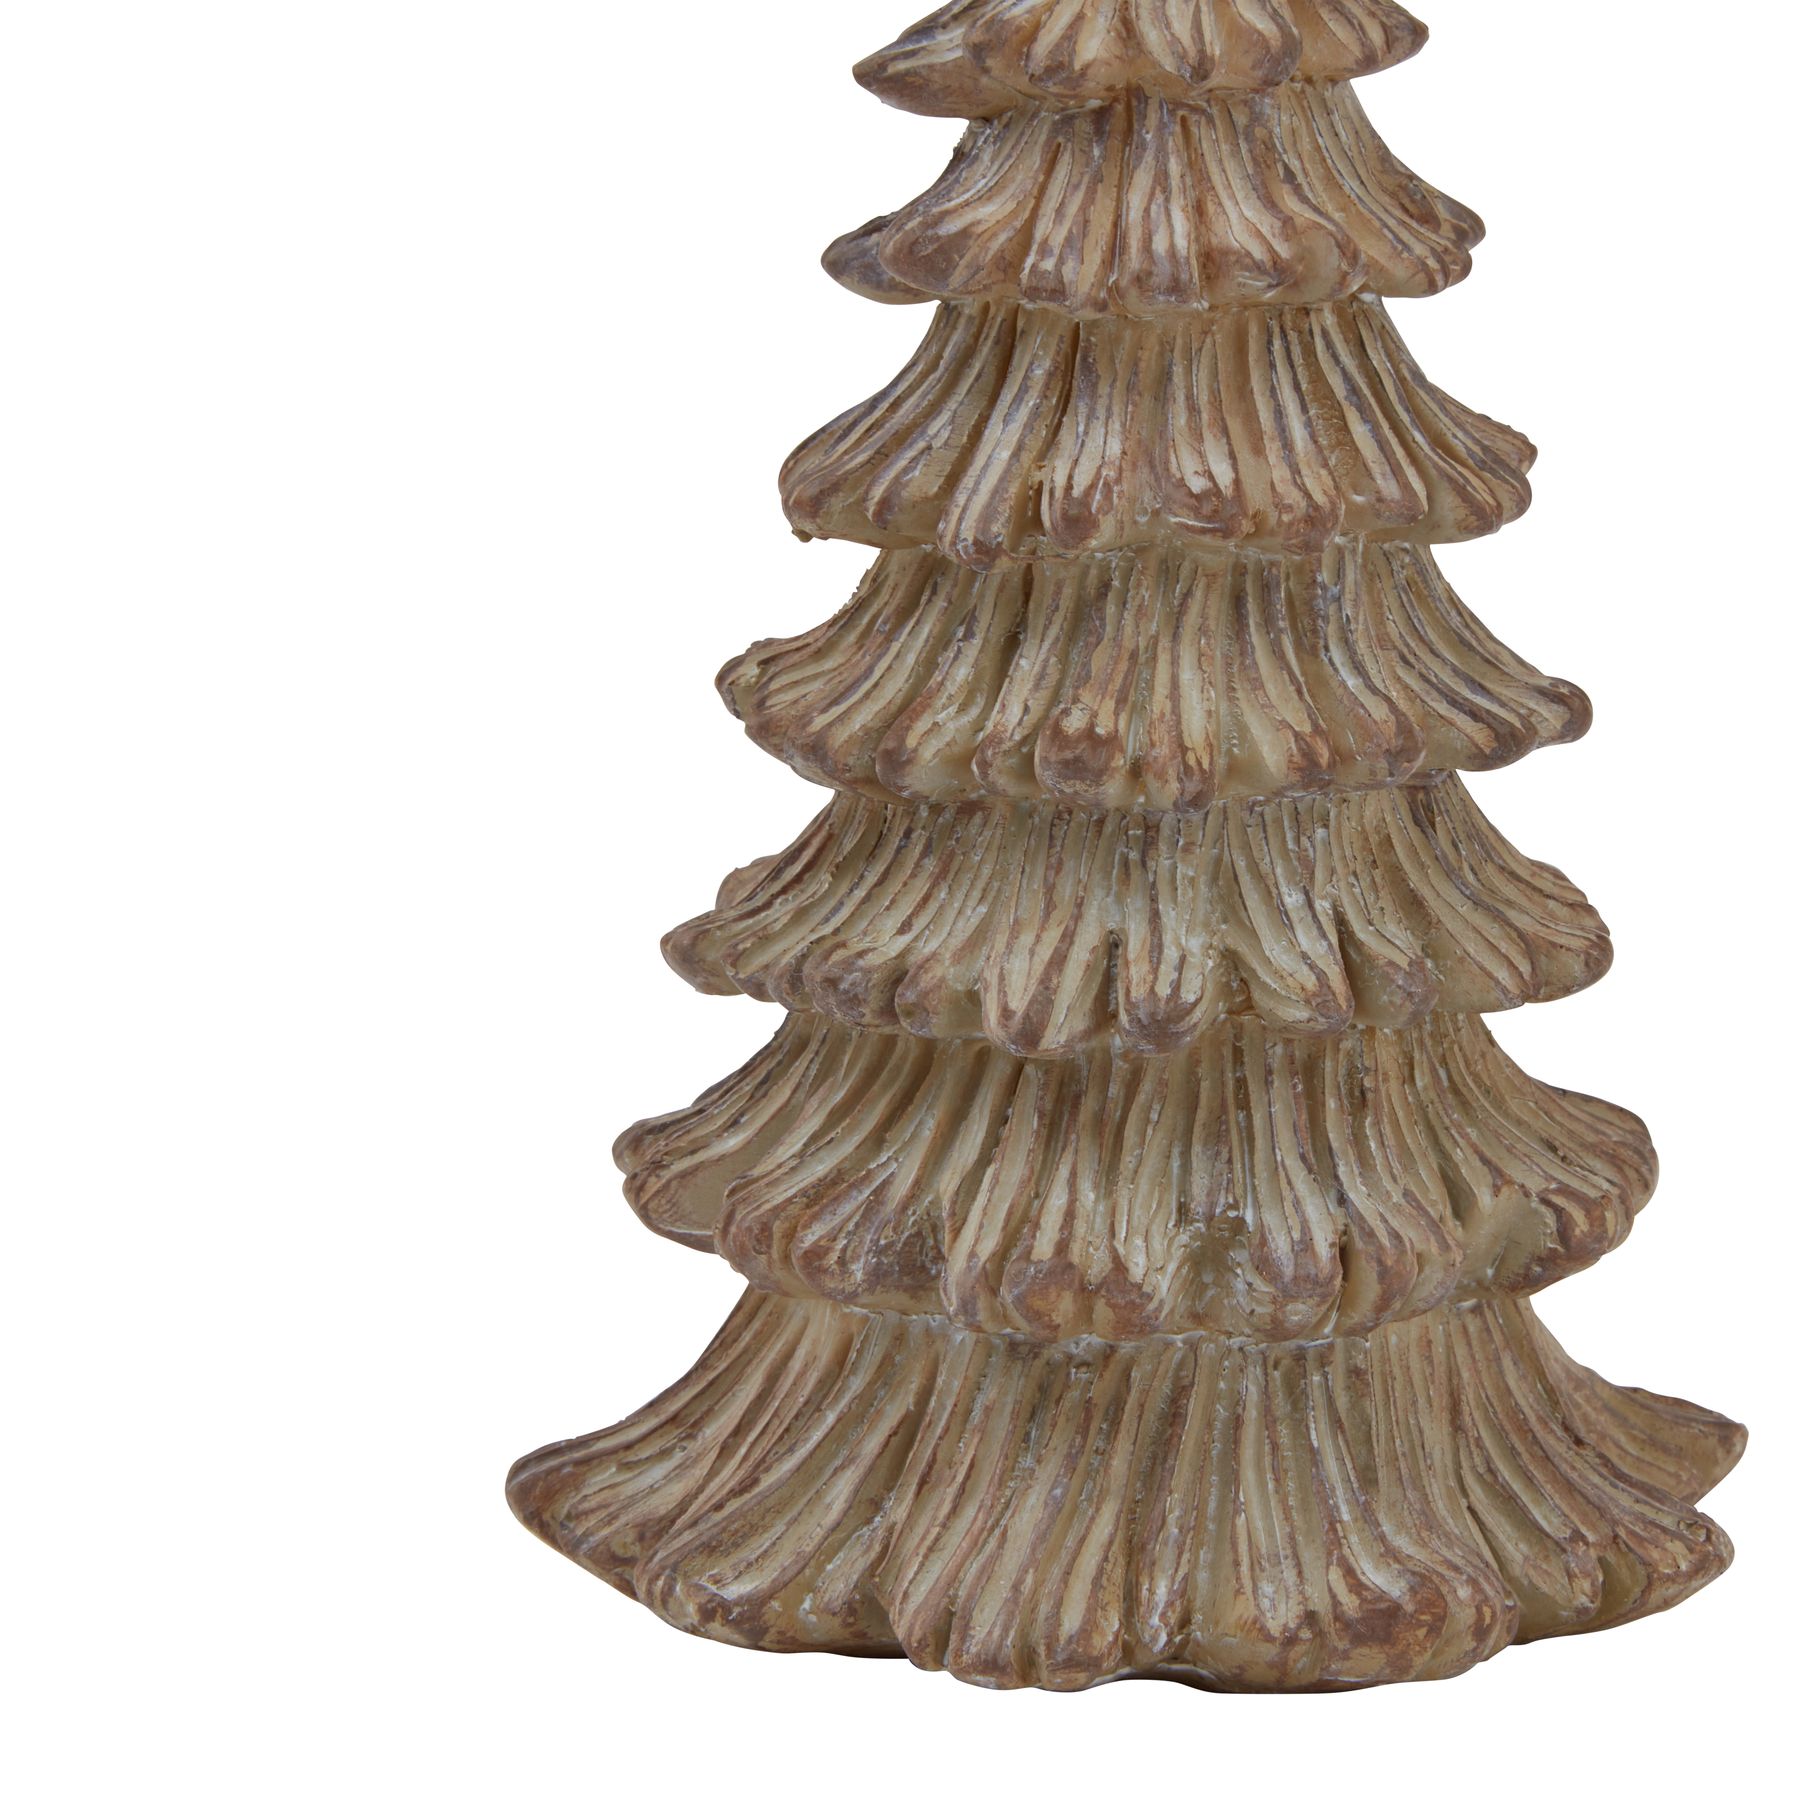 Small Pine Tree Sculpture - Image 3